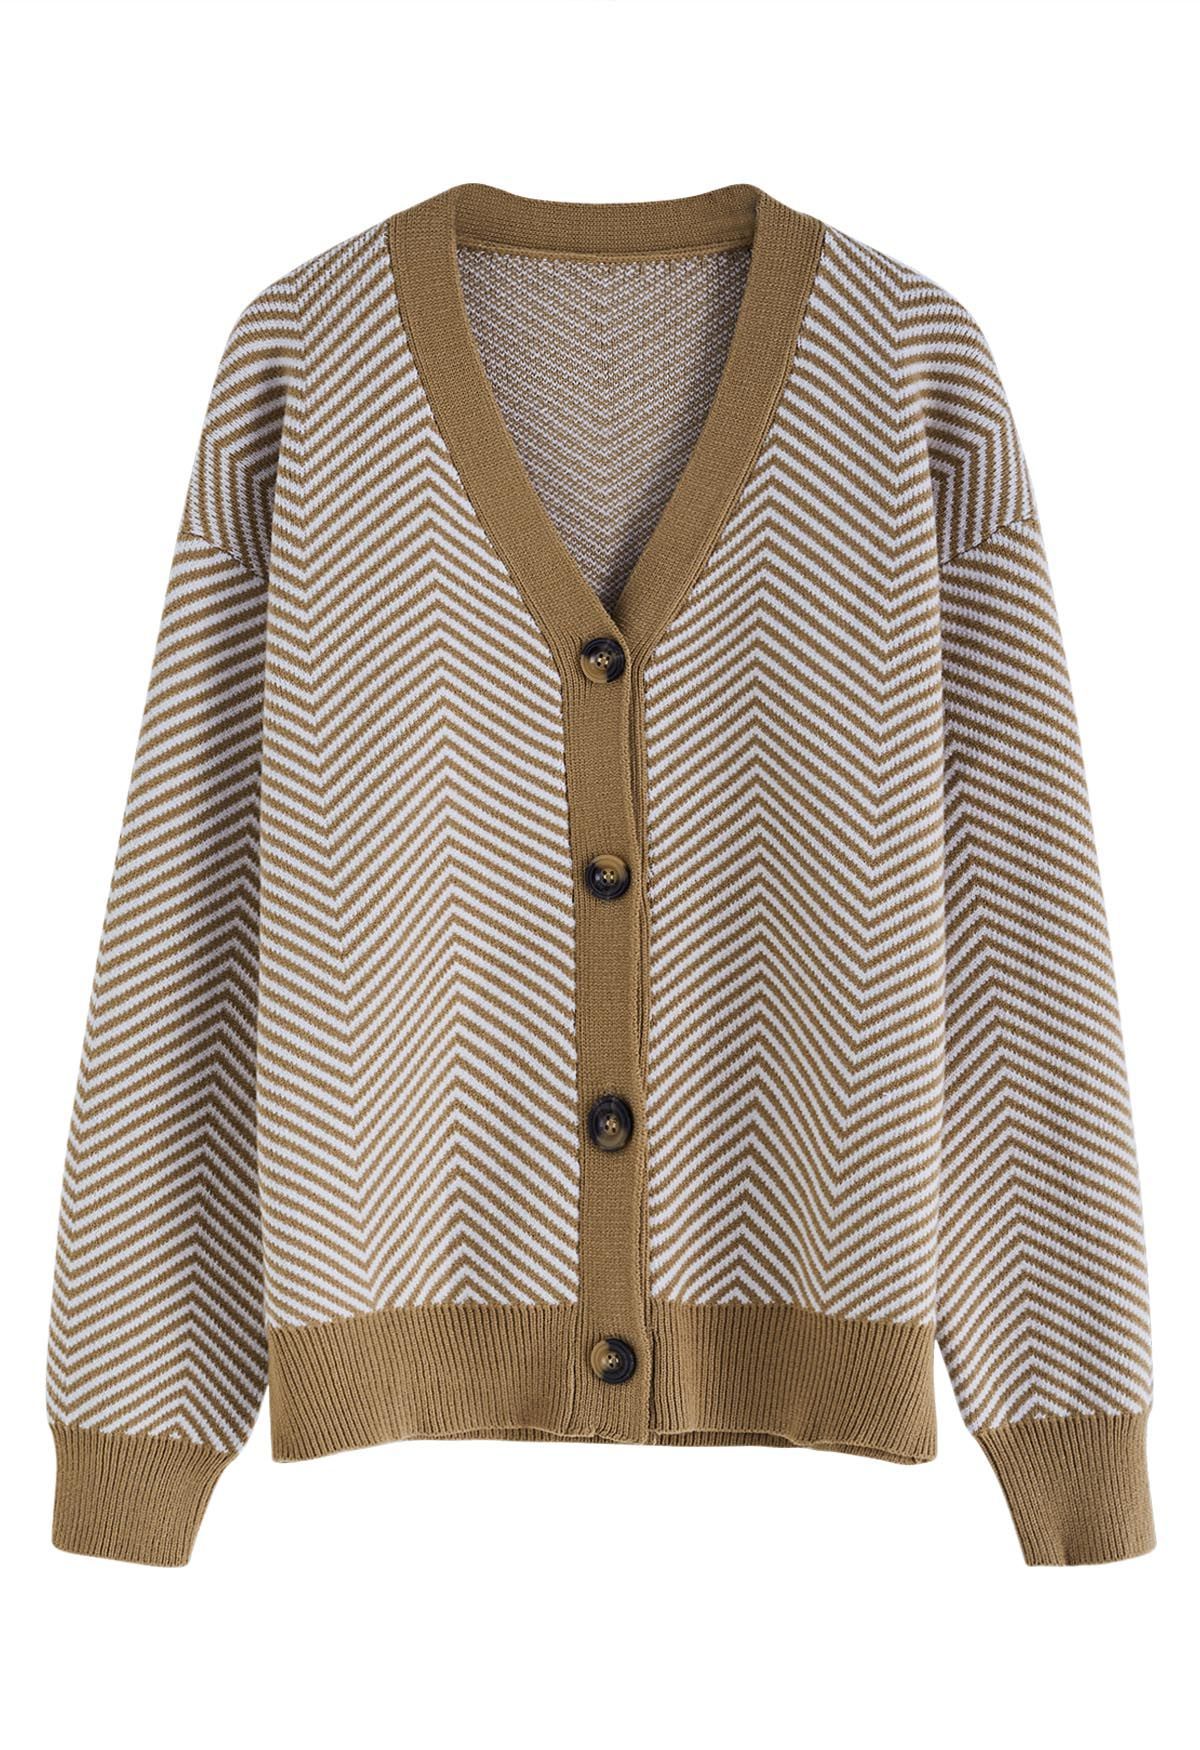 Zigzag Stripe Pattern Buttoned Knit Cardigan in Camel | Chicwish